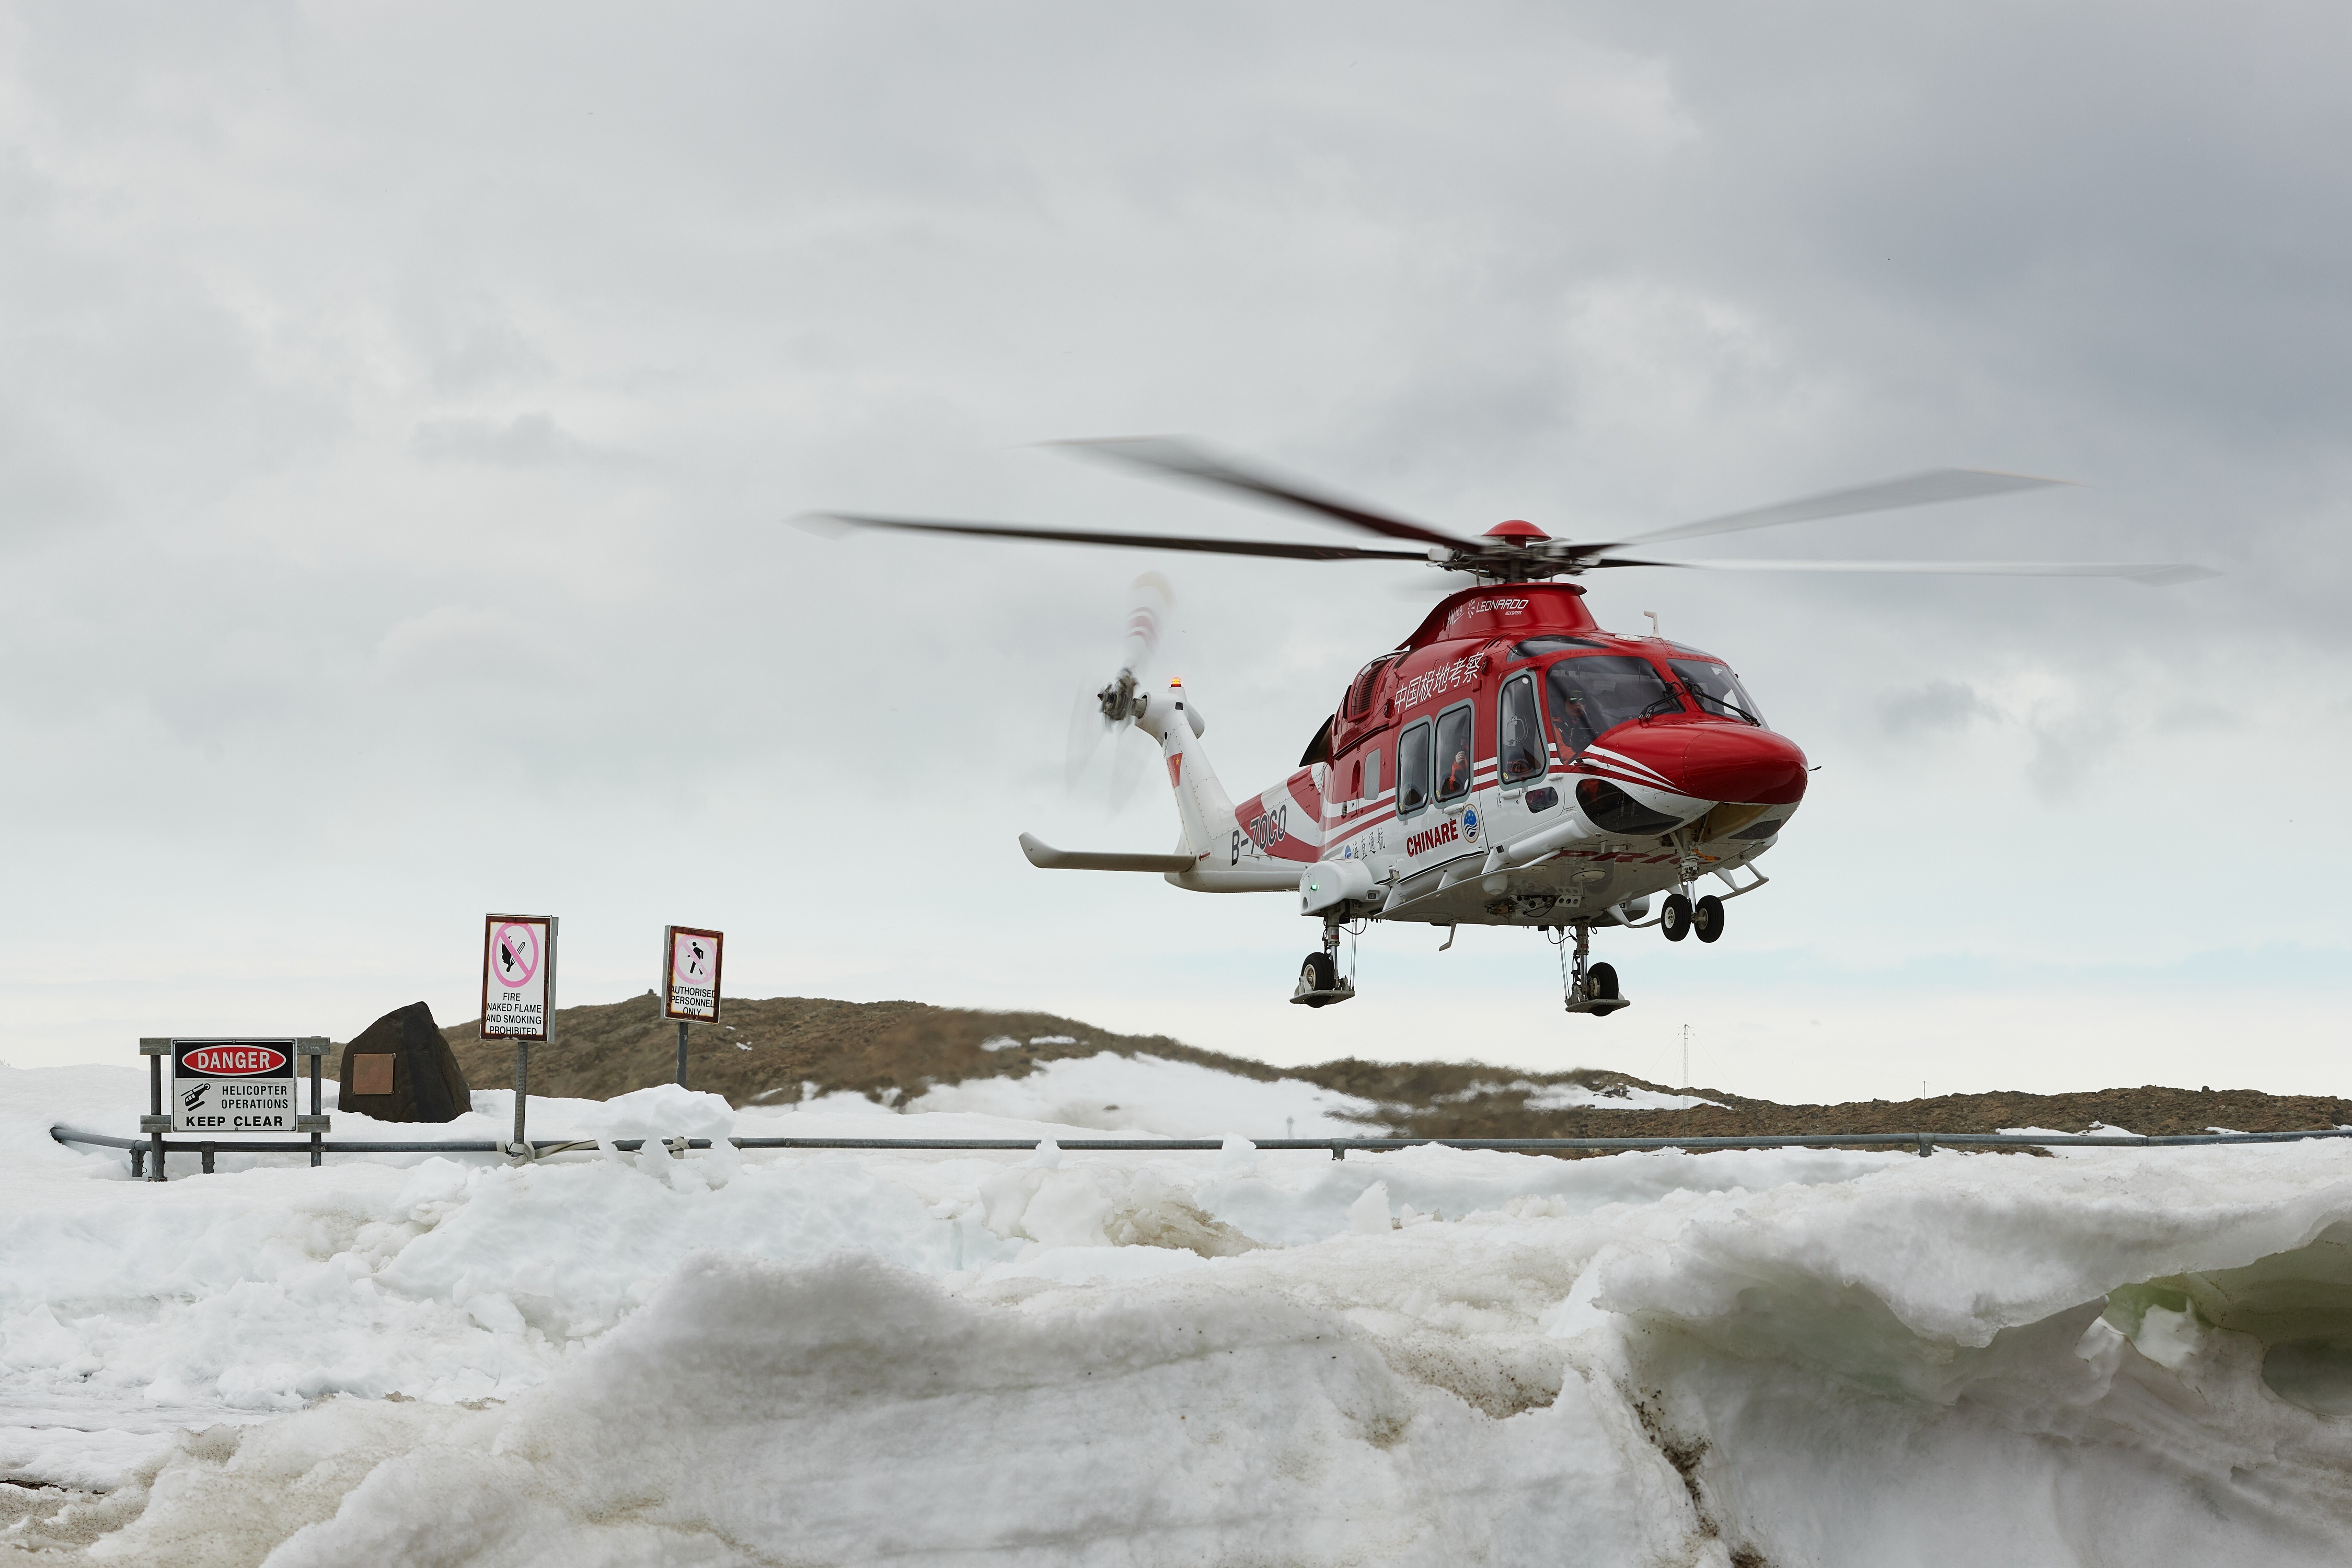 A Chinese helicopter lands at Davis research station as part of the medevac operation. Photo: Dan Dyer